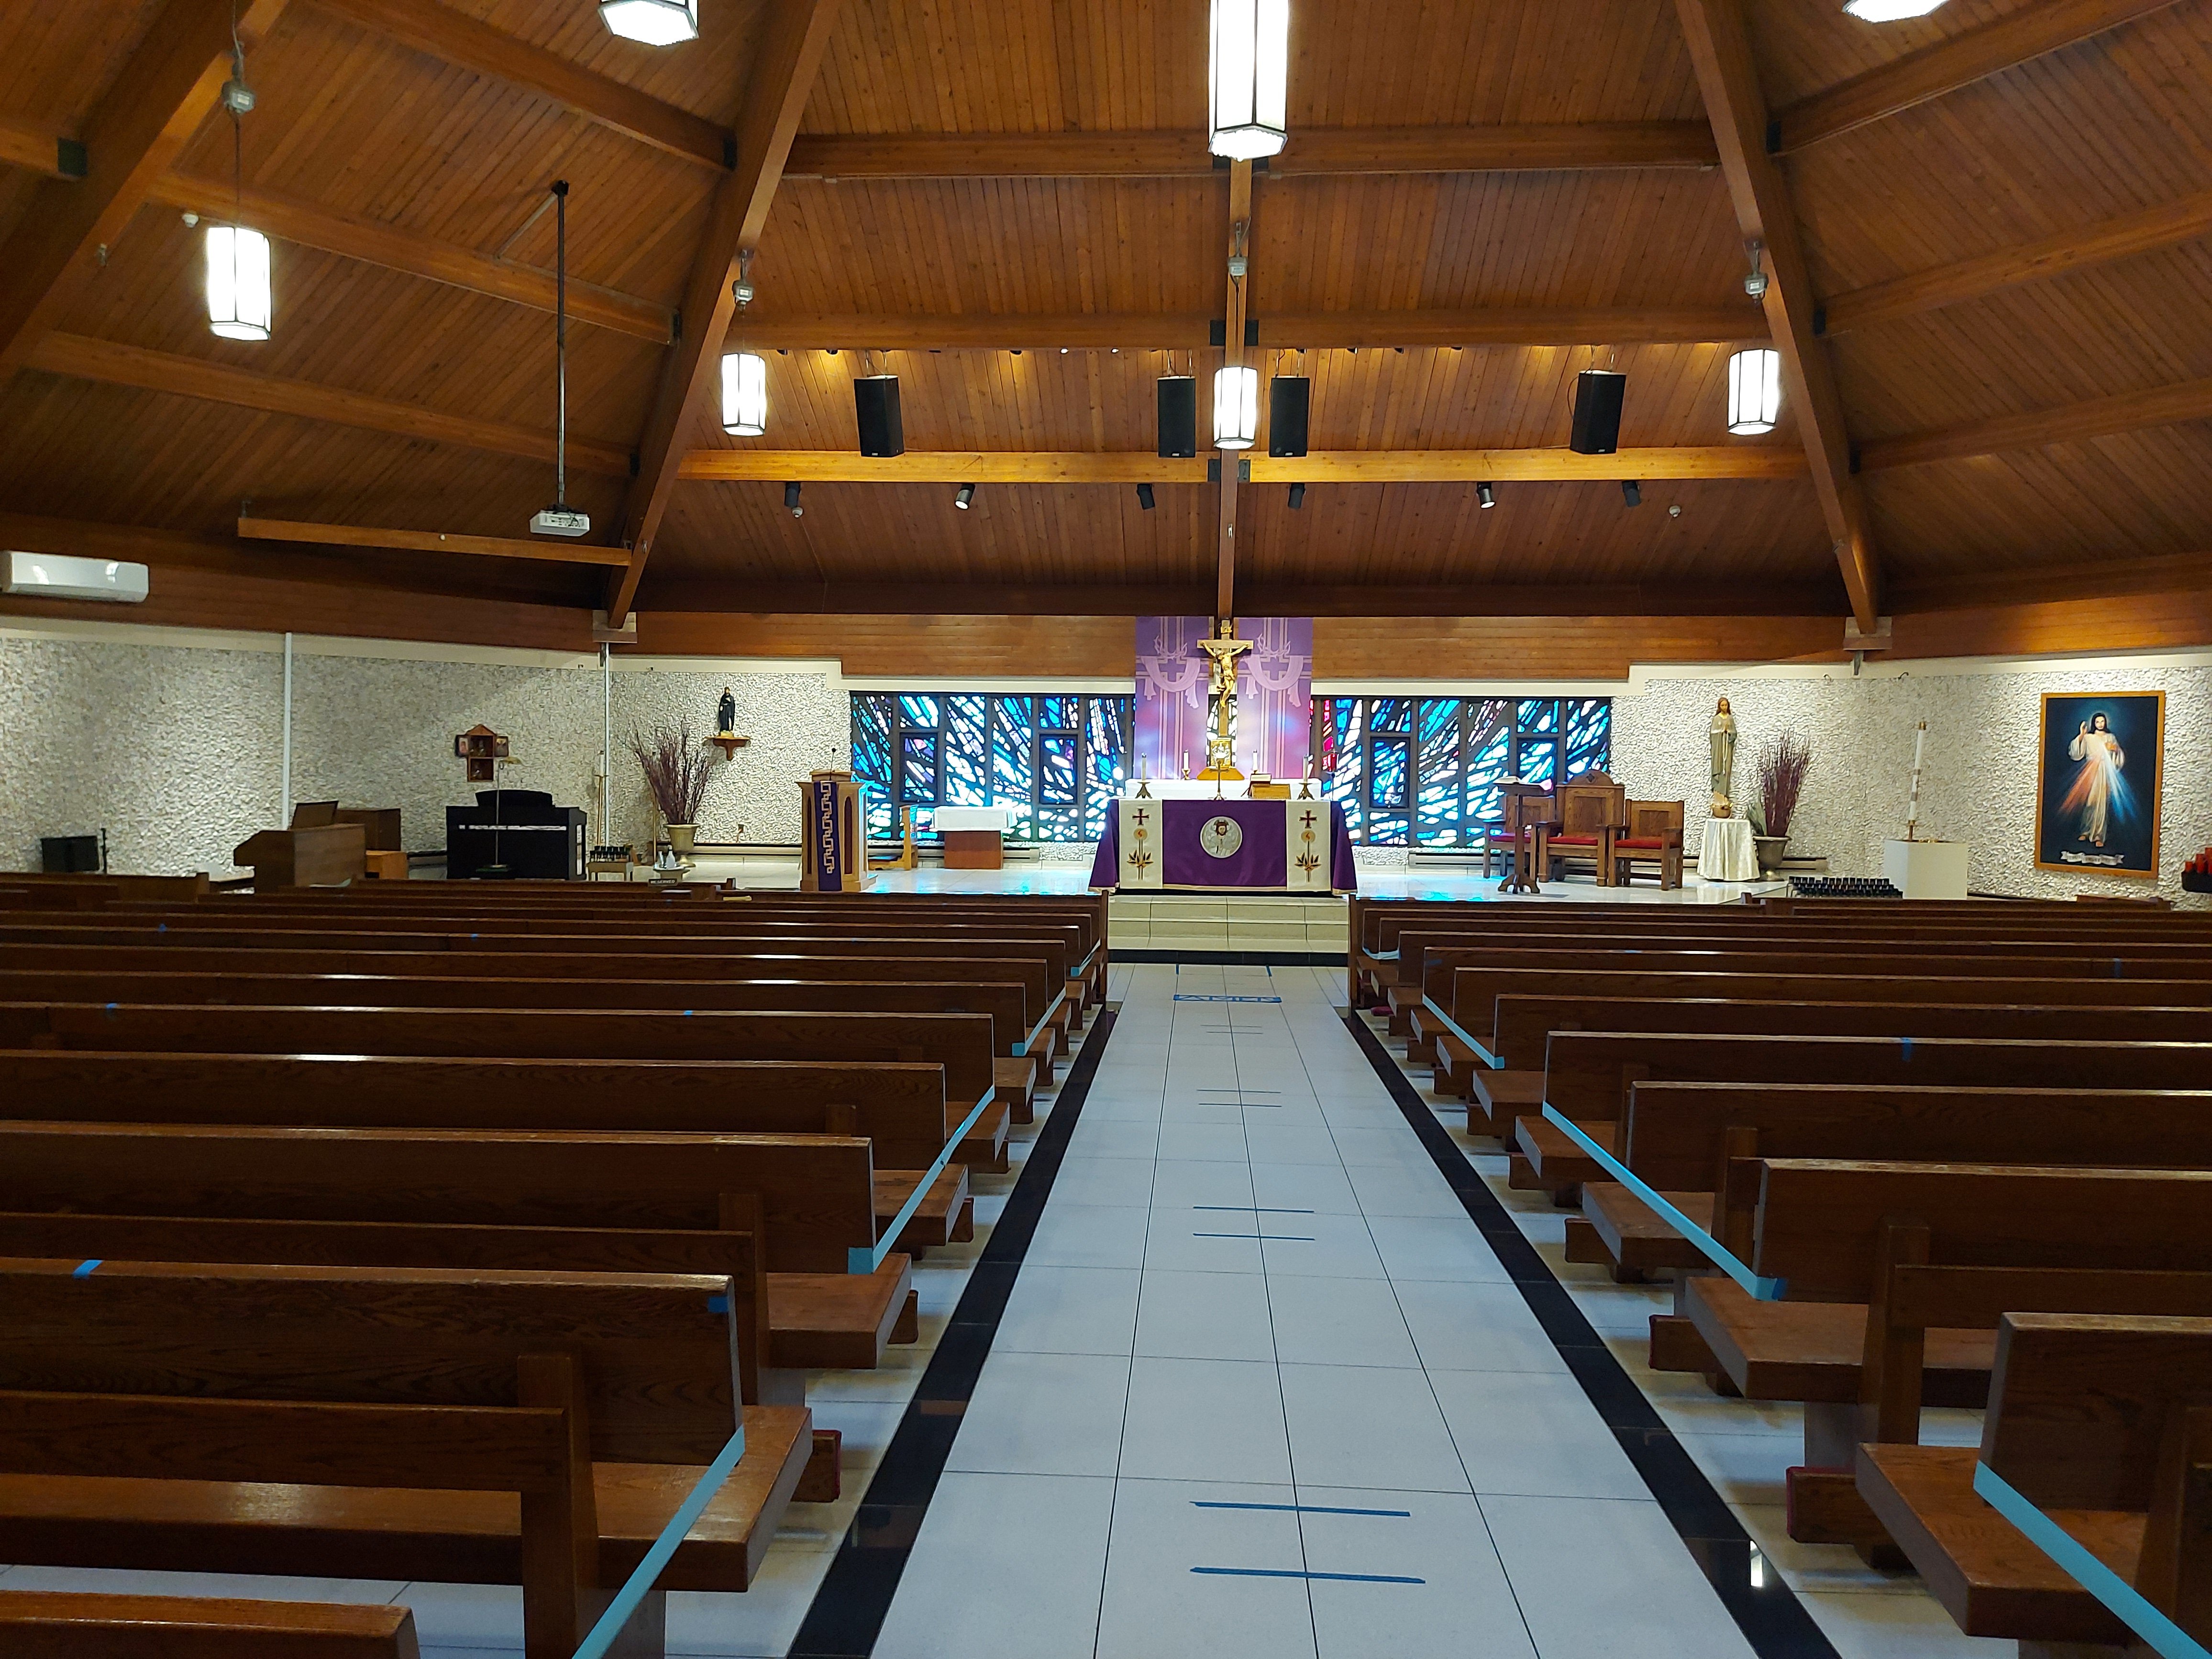 Taken from the back of the Church, a full view of the Sanctuary and the pews of the Church